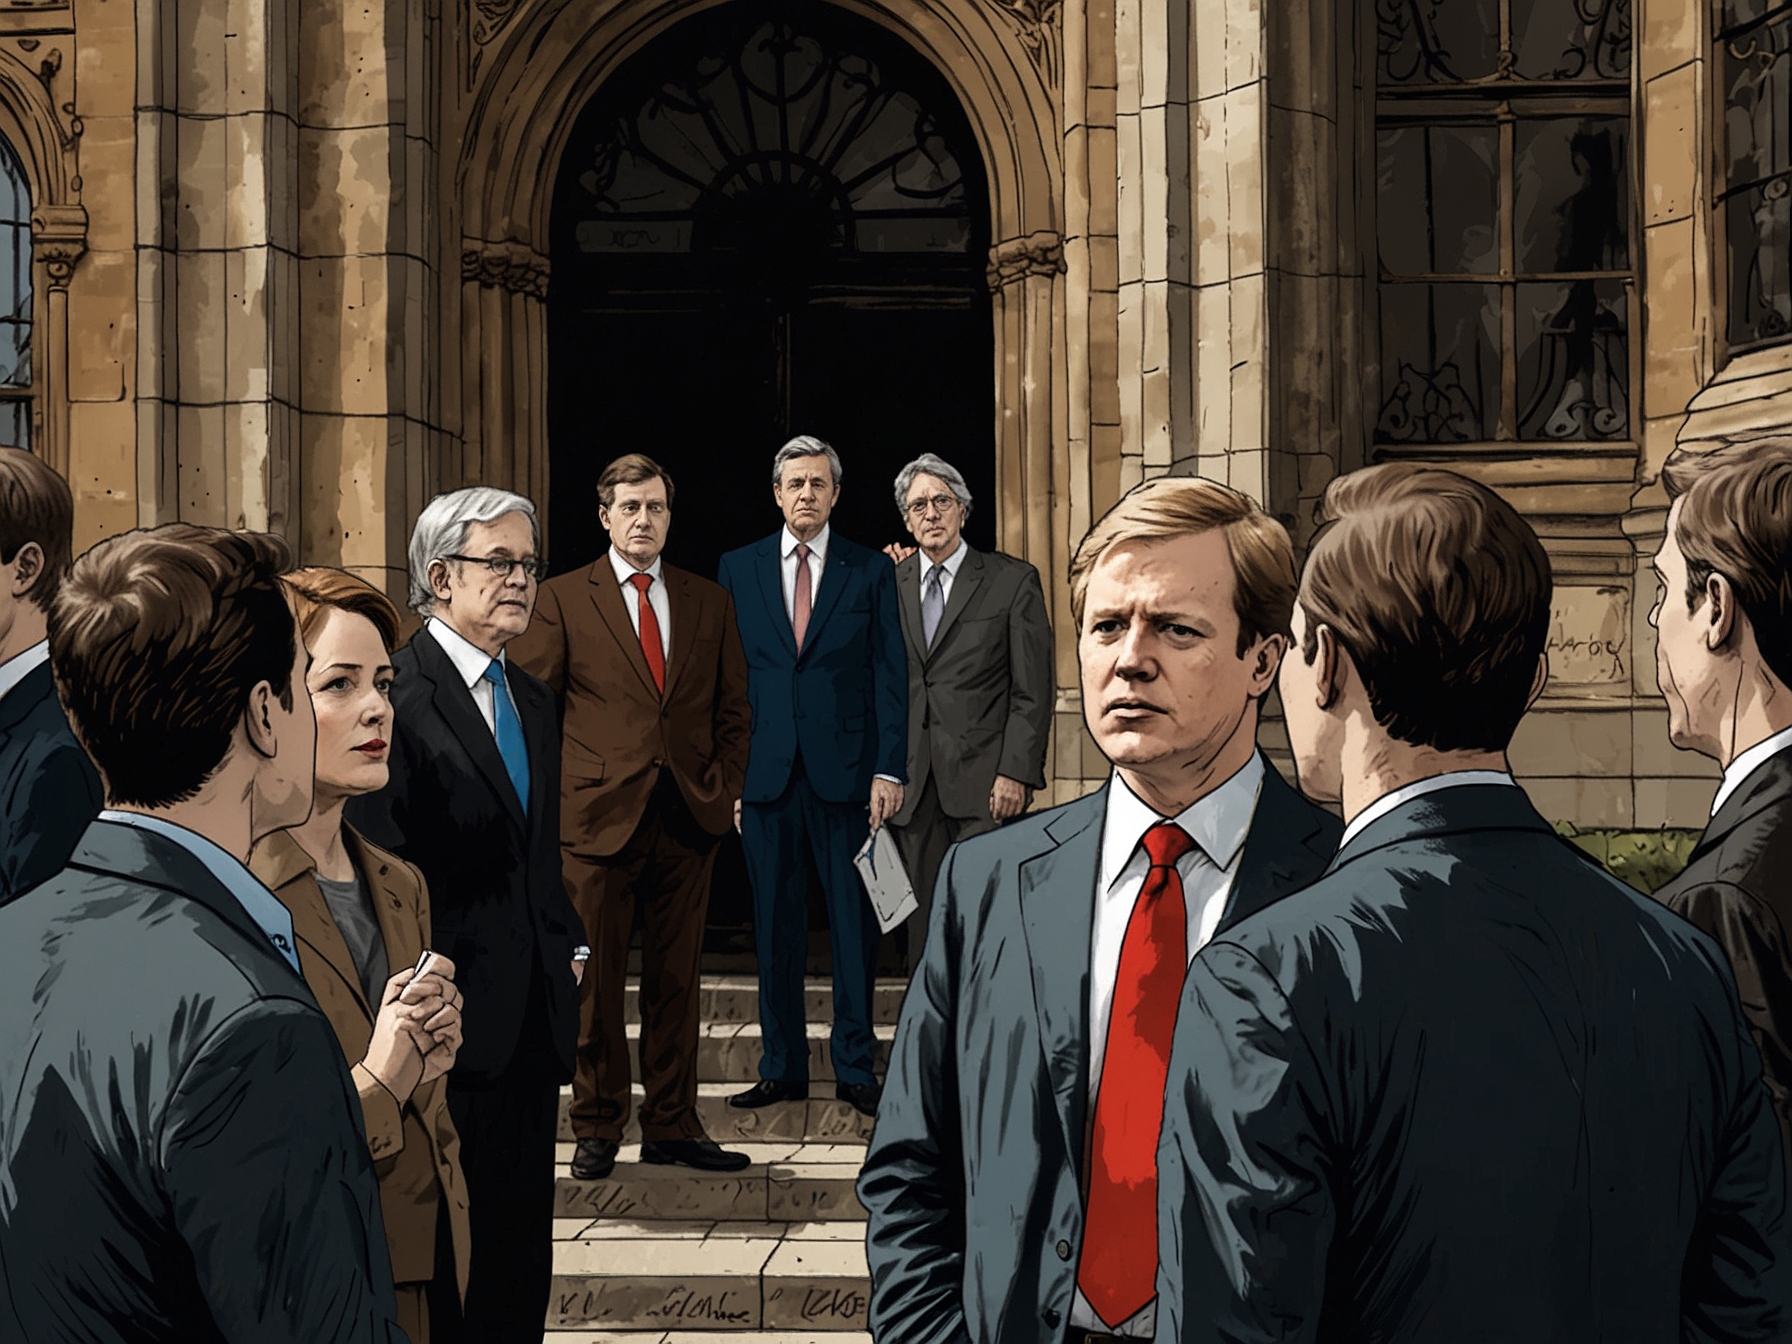 A depiction of Conservative party members outside Parliament, illustrating the tension and media frenzy amid the allegations of election betting and unauthorized information disclosure.